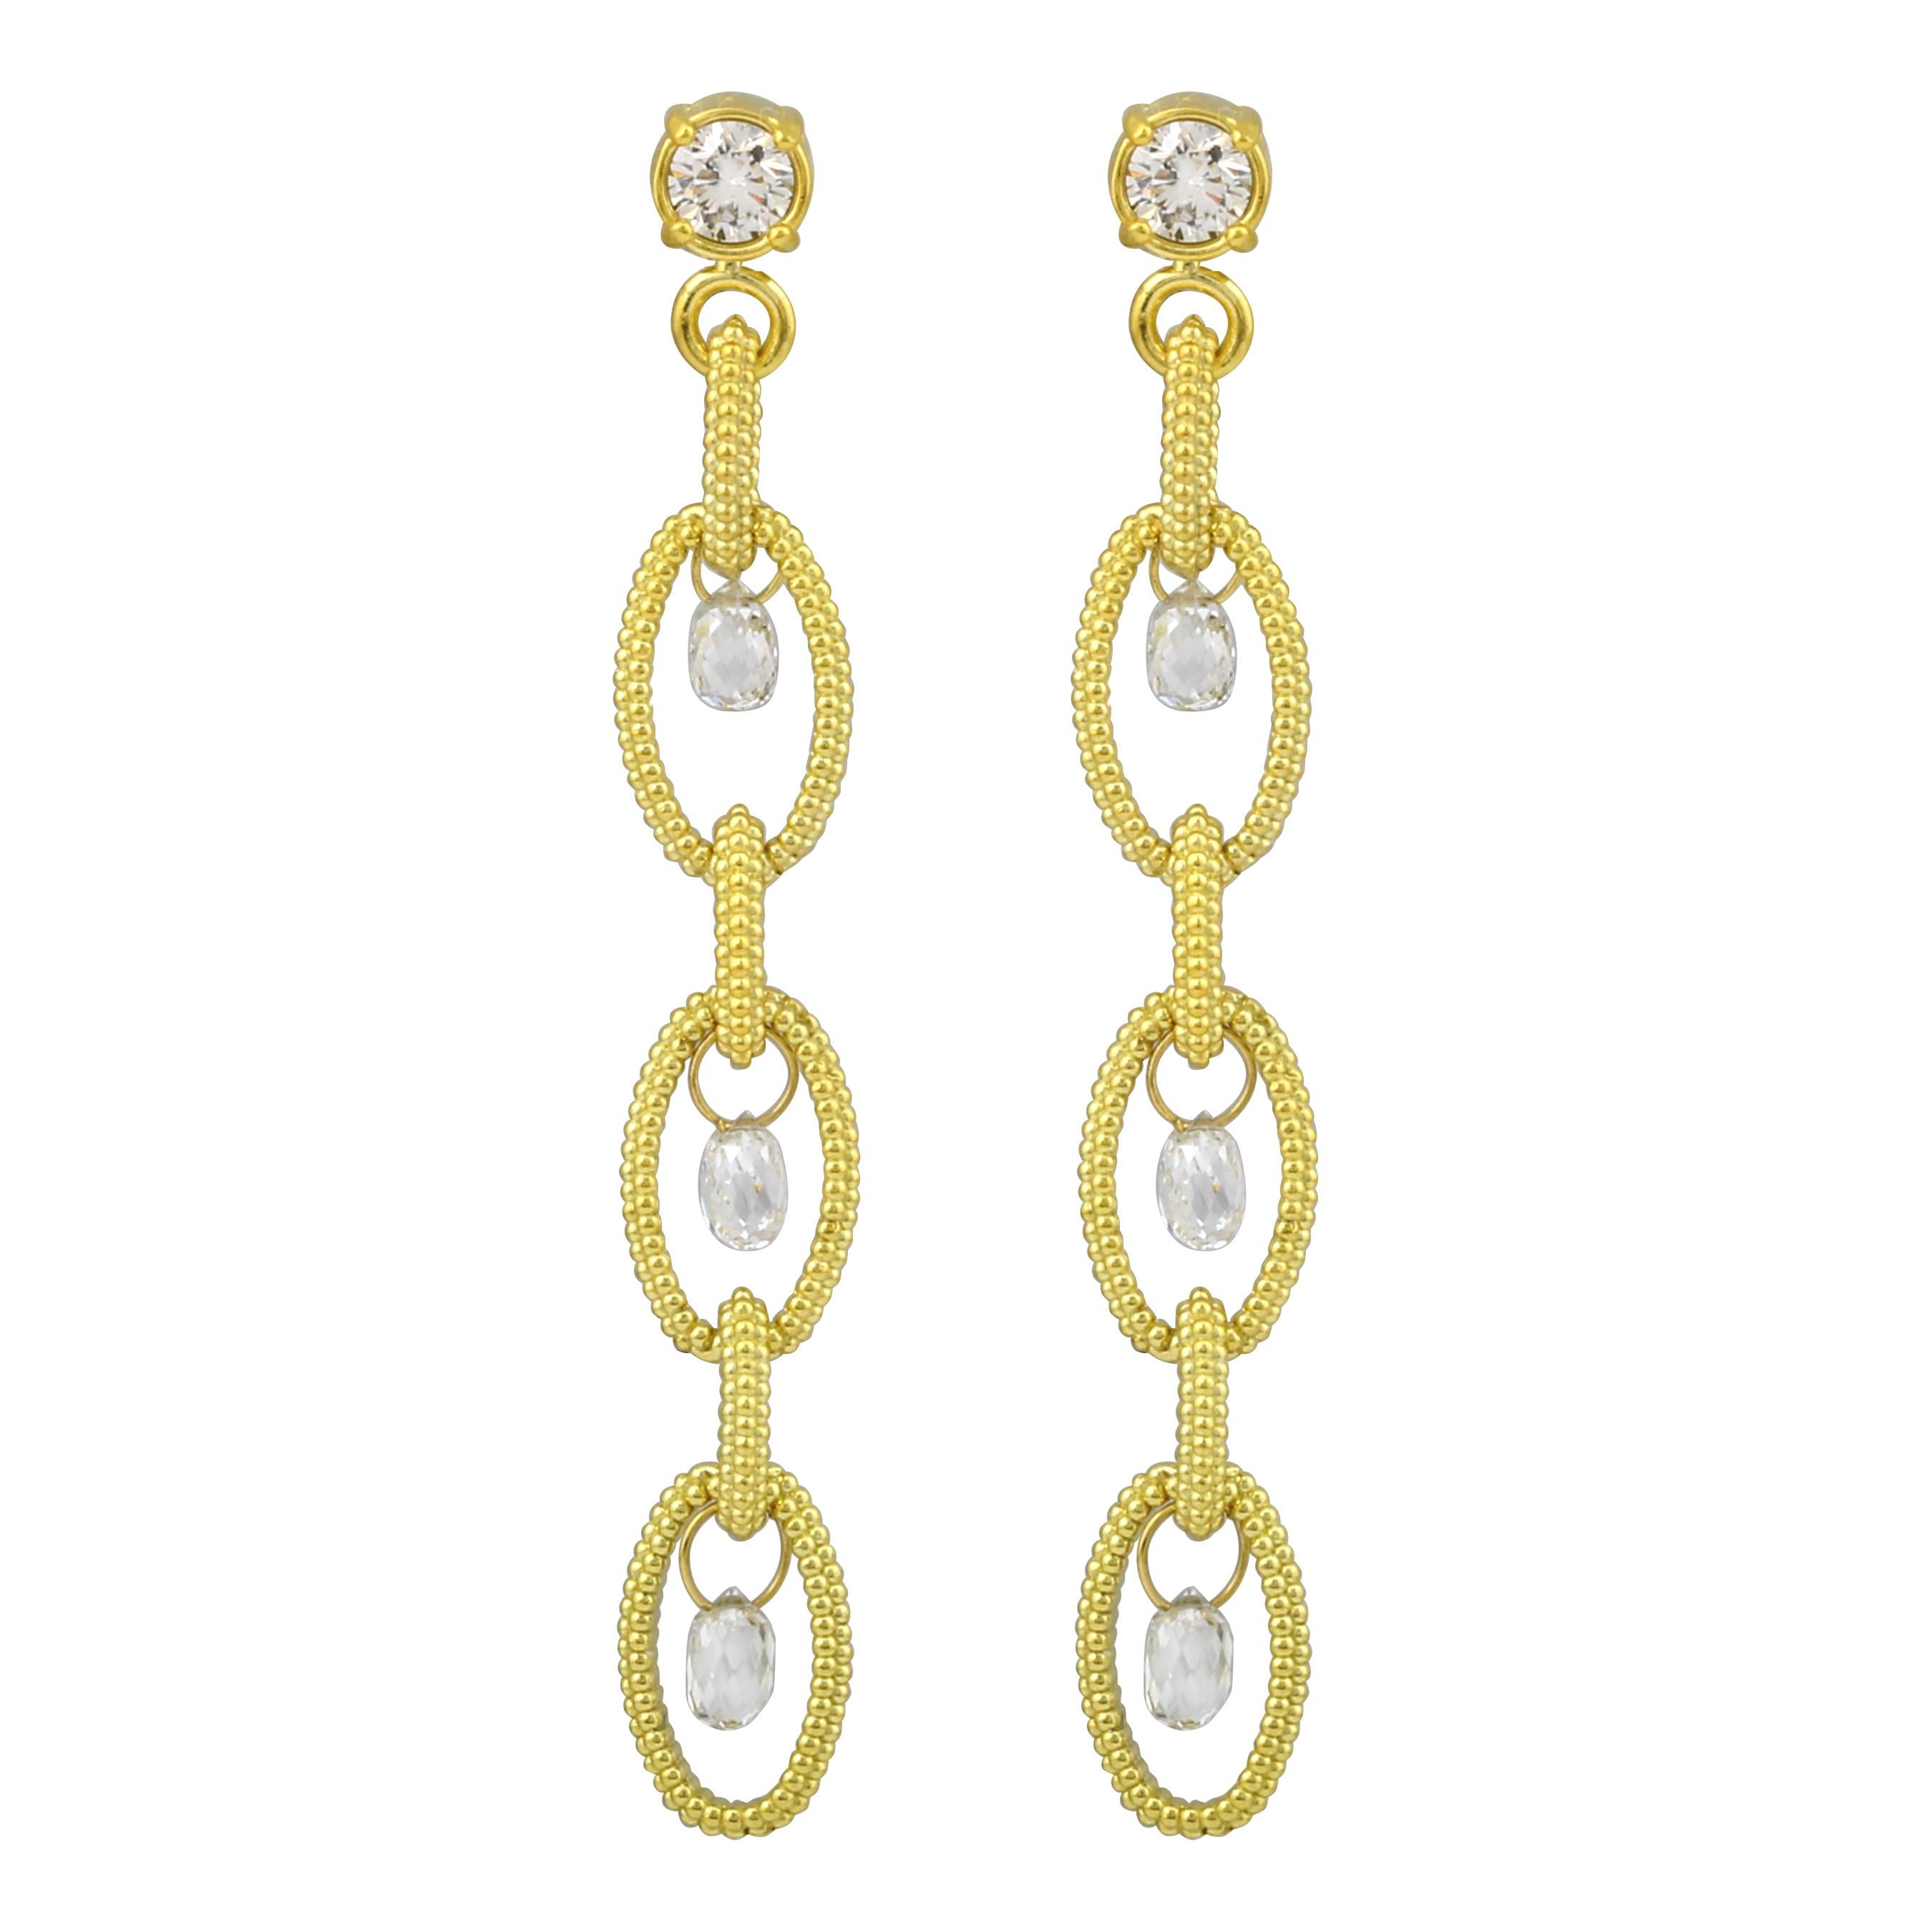 Etruscan Oval Granulated Link Earrings with Diamond Briolettes in 18k Gold designed by Amyn The Jeweler.

6 Diamond Briolettes

2 Diamonds

ERETROVALDIABRIO

Made with passion in Los Angeles